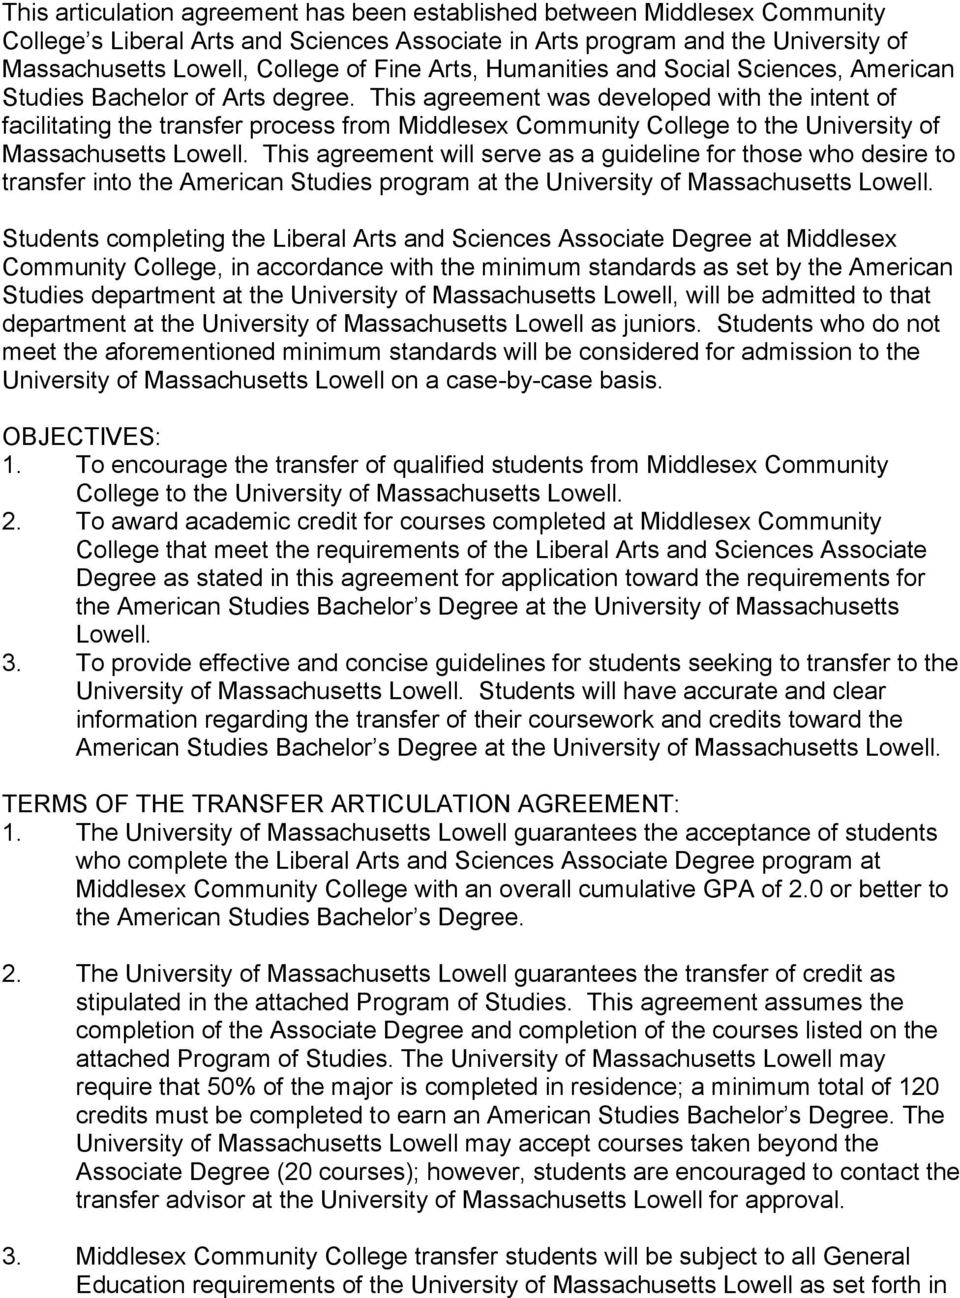 This agreement was developed with the intent of facilitating the transfer process from Middlesex Community College to the University of Massachusetts Lowell.